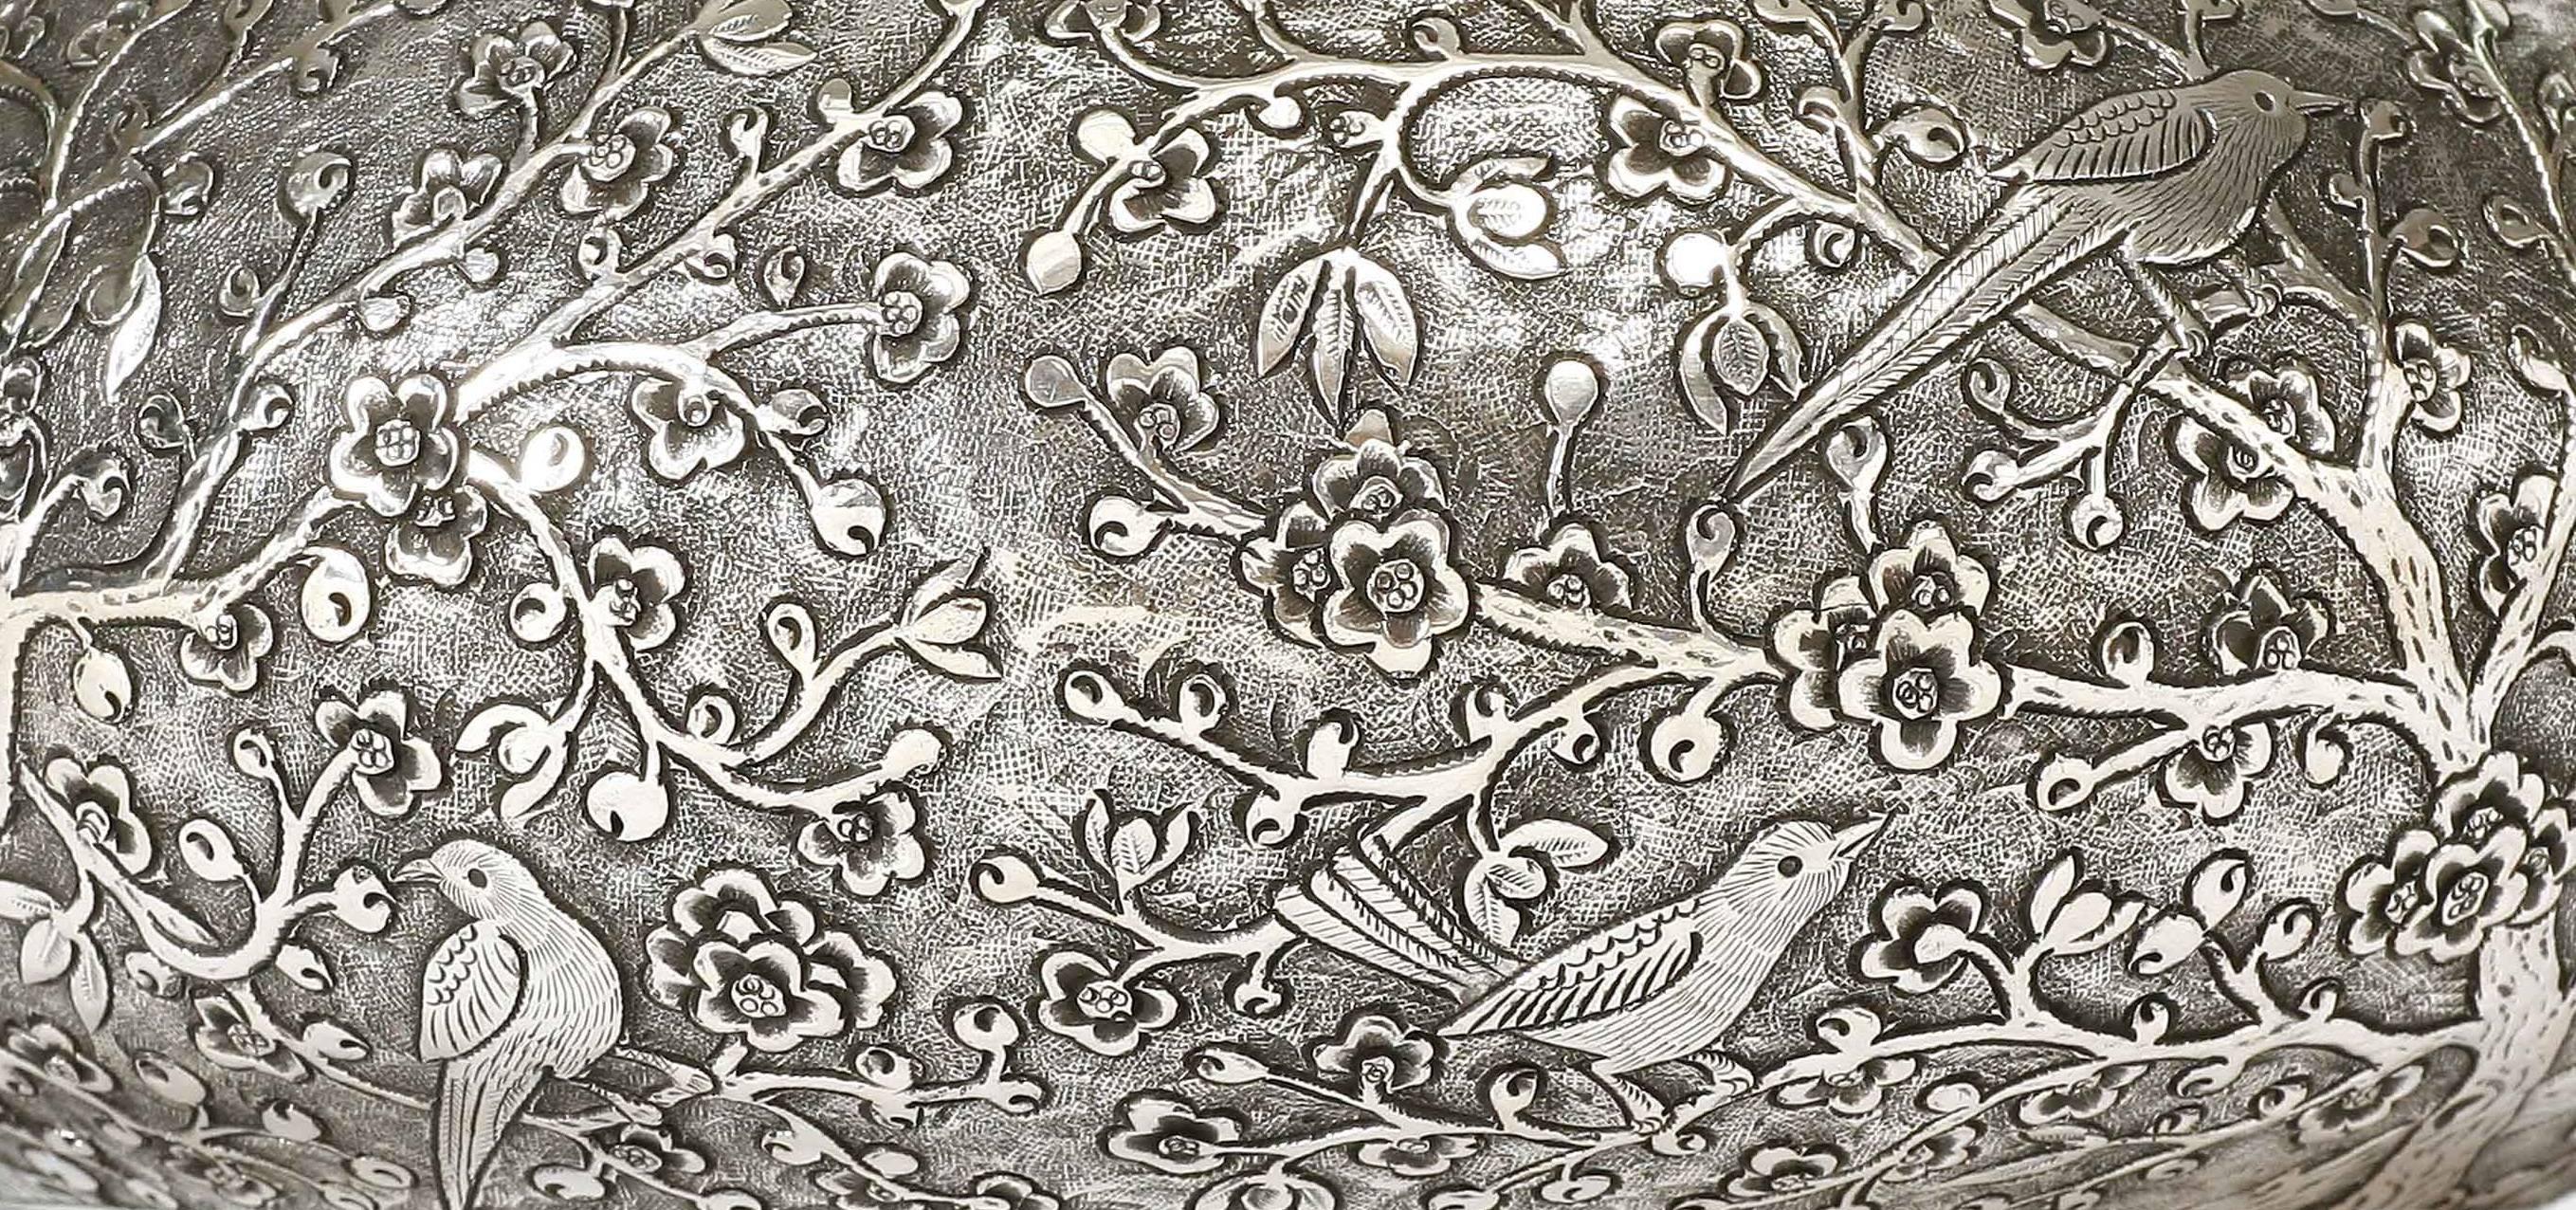 Hong Kong Hand-Worked Solid Silver Bowl, Chinoiserie Blossom and Birds Motif, Centrepiece